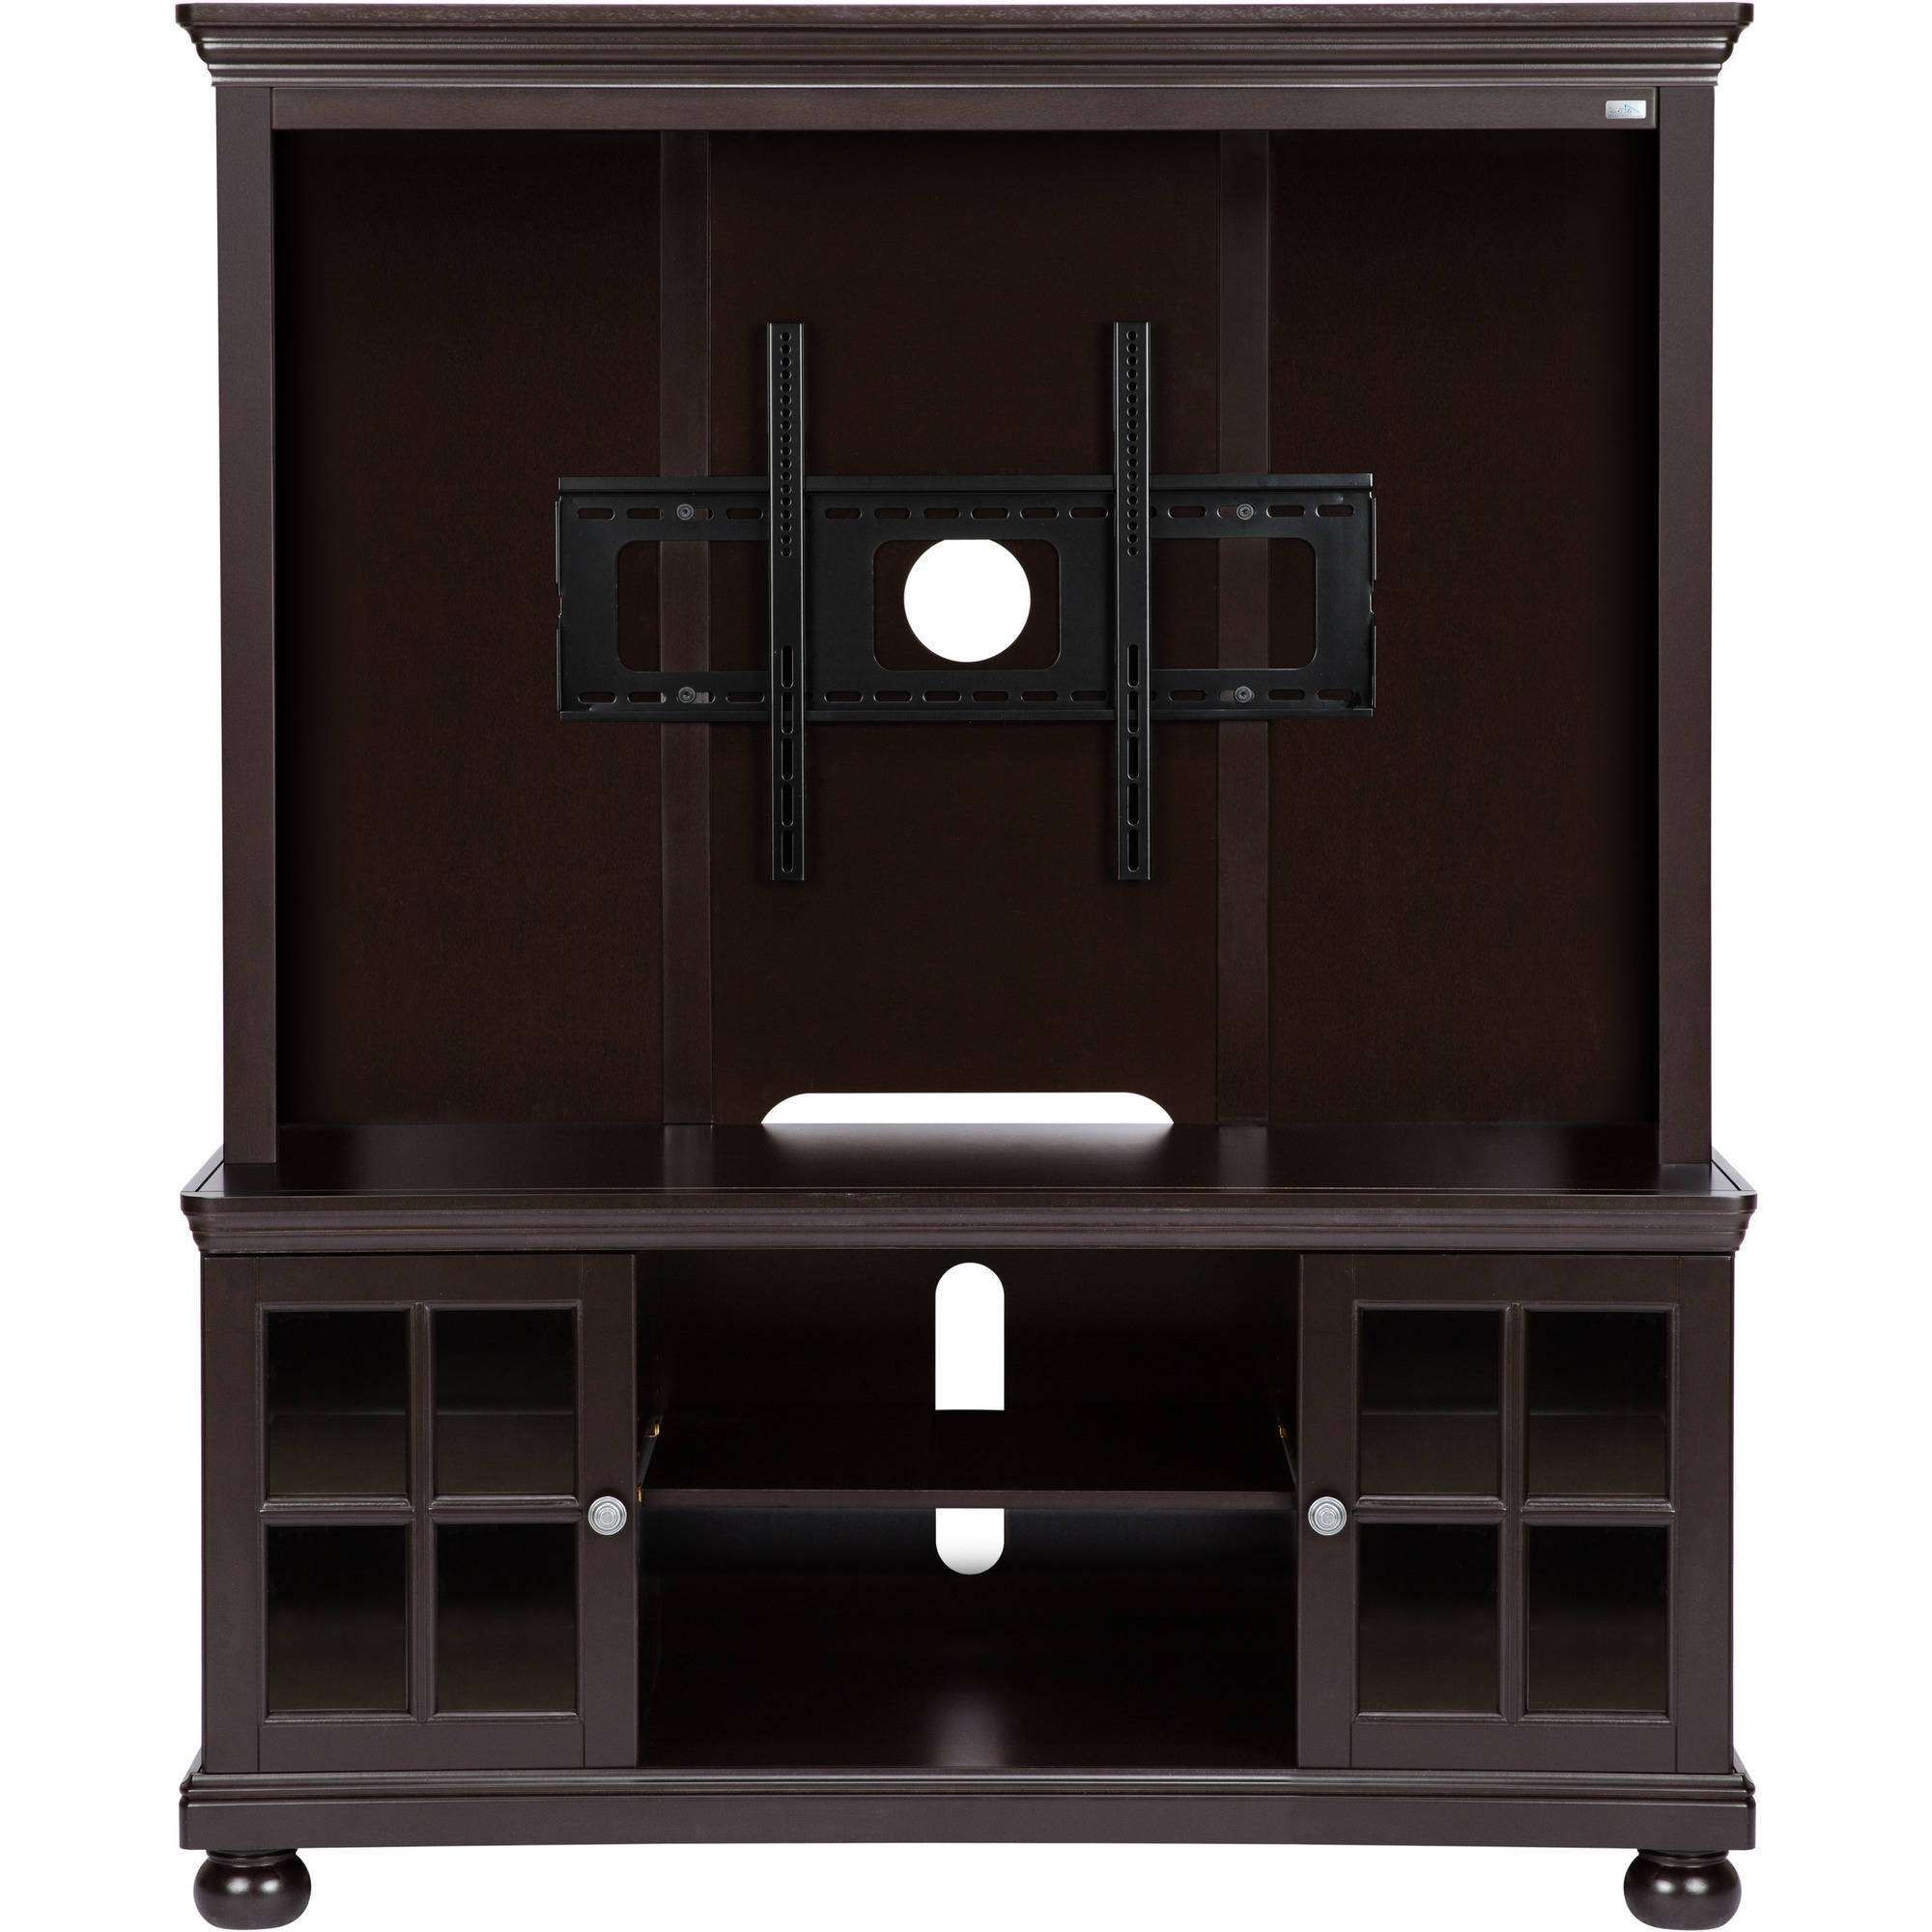 Better Home And Gardens 52" Flat Screen Tv Stand With Hutch Regarding Corner Tv Cabinets With Hutch (View 10 of 20)